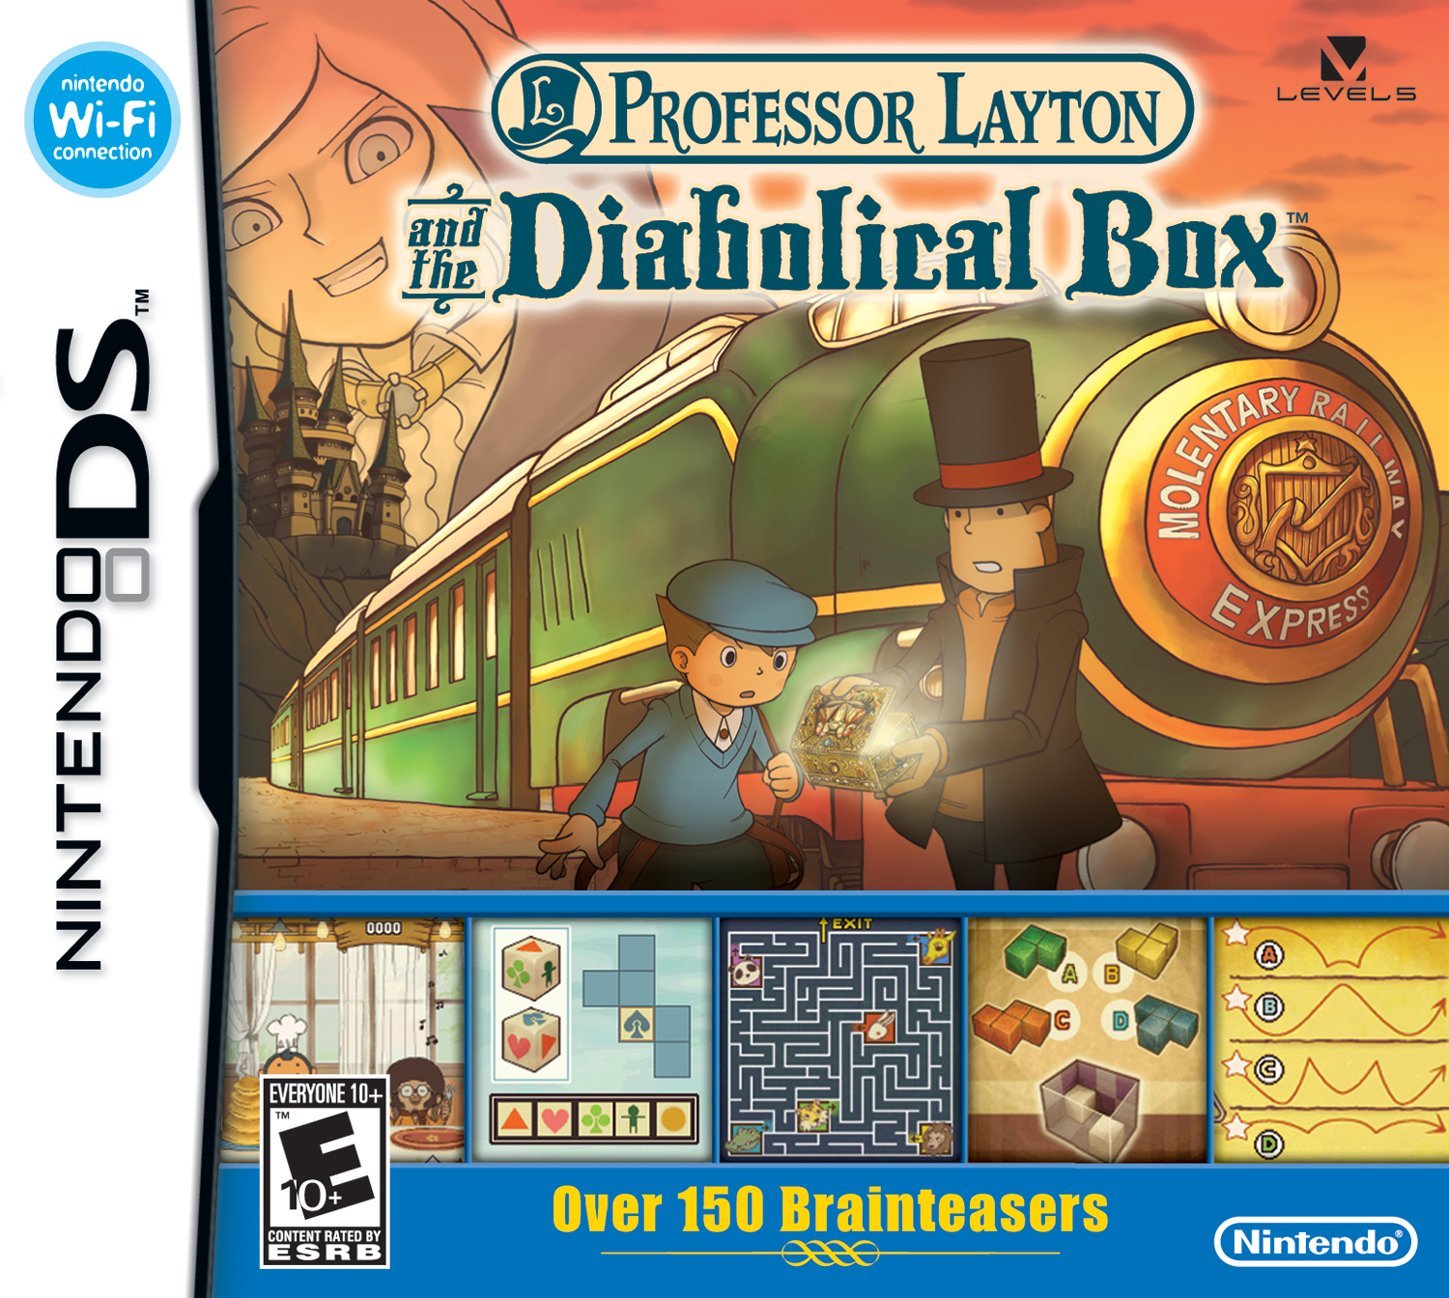 the NDS box art for Professor Layton and the Diabolical Box. it shows Layton and Luke standing in front of a train looking into a bejeweled box with light emanating from it. in the background, the face of a grinning person with long hair is visible in the sky over a distant castle. the bottom of the art has a banner that says 'Over 150 brainteasers' with pictures of a few puzzles that appear in the game